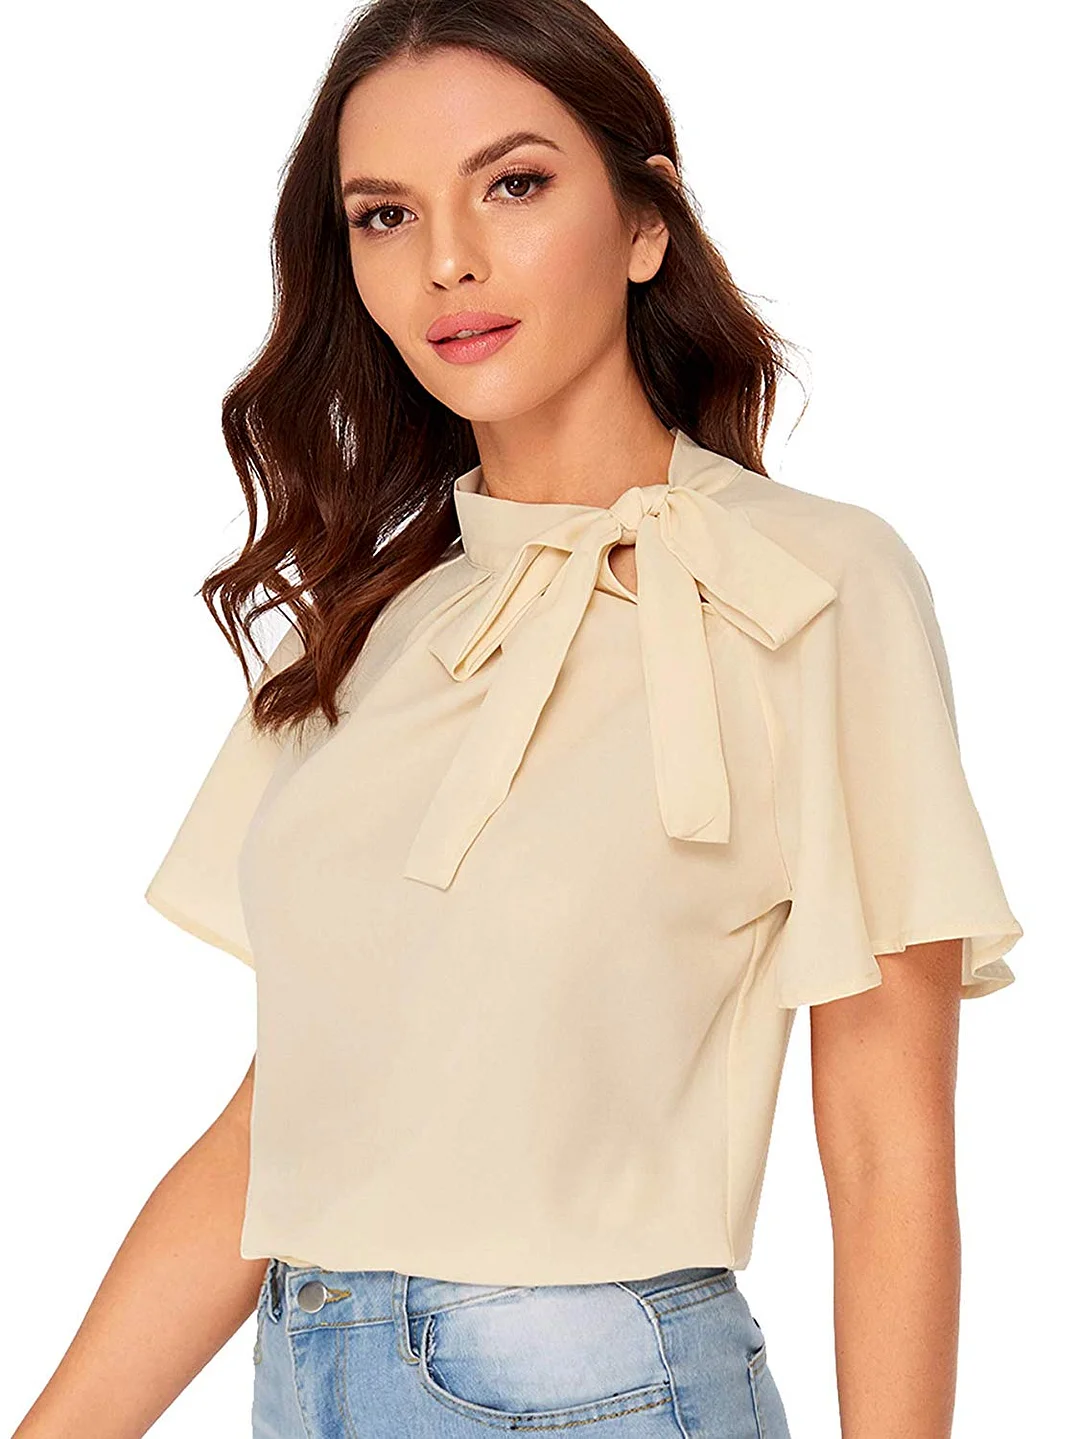 Women's Casual Side Bow Tie Neck Short Sleeve Blouse Shirt Top